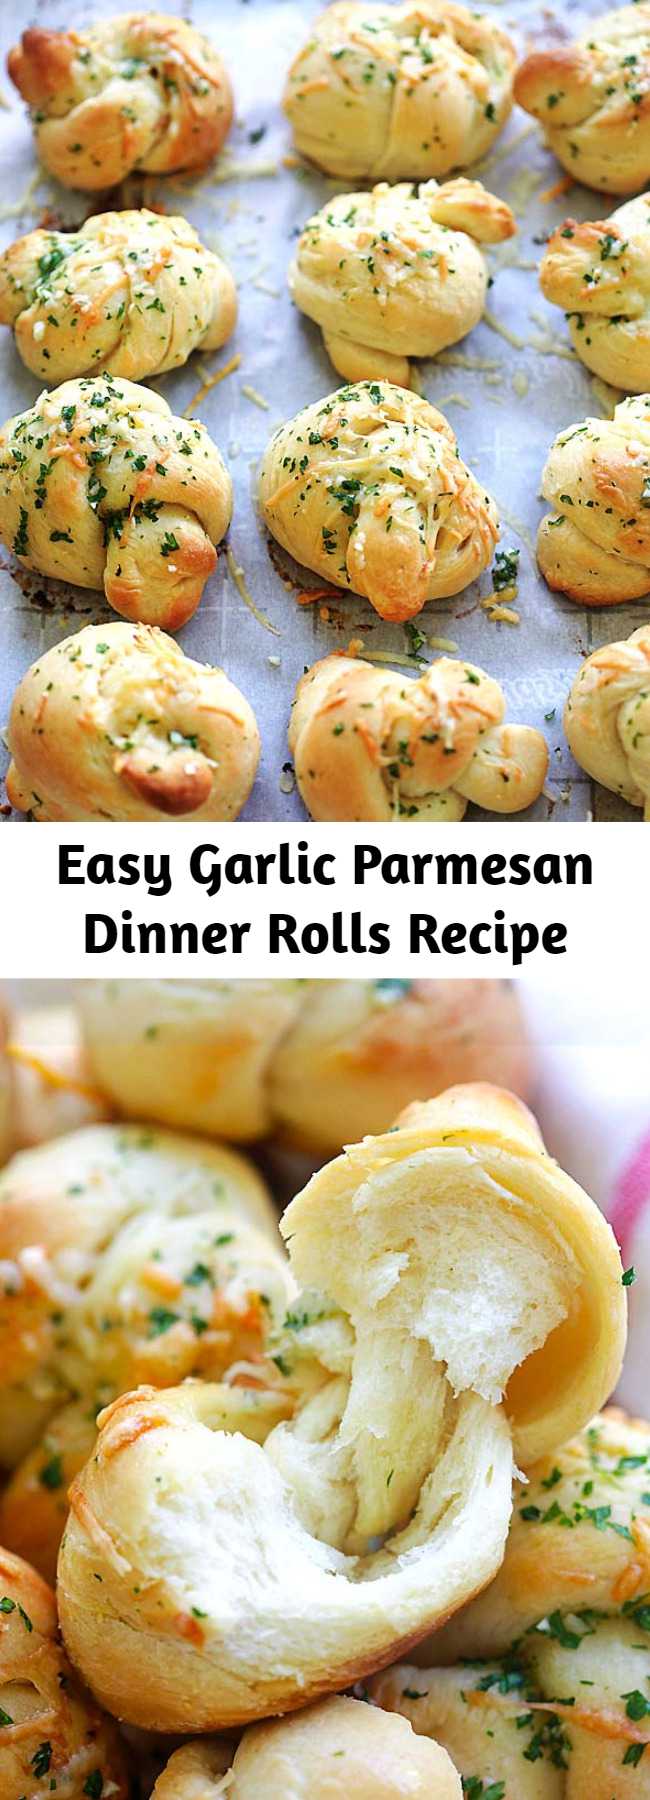 Easy Garlic Parmesan Dinner Rolls Recipe - Homemade garlic Parmesan dinner rolls are the best dinner rolls ever. This recipe is so easy with cotton soft rolls topped with garlic and Parmesan cheese. So good! #baking #dinner